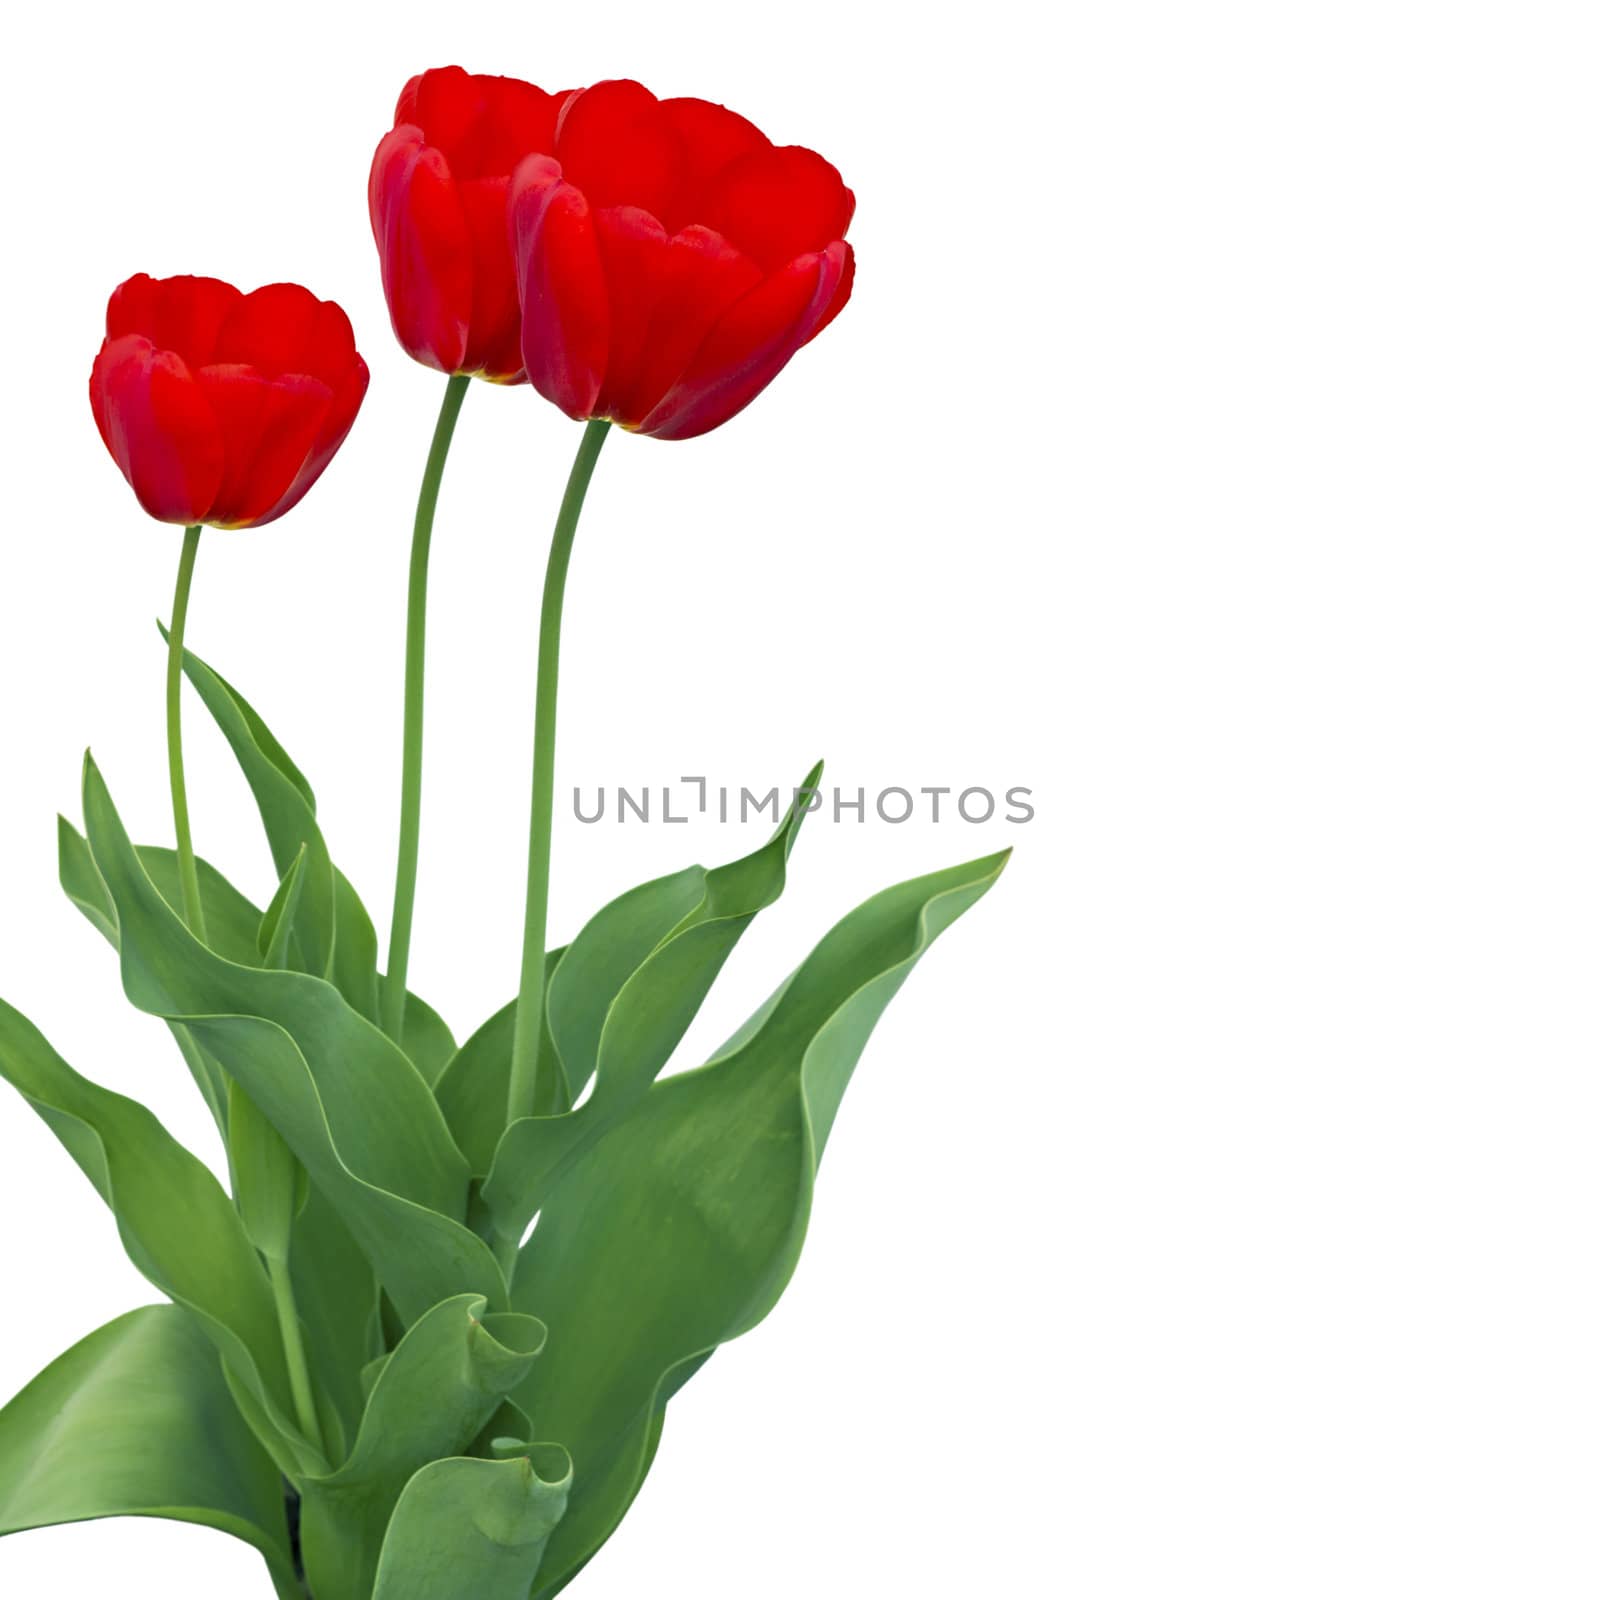 Three red tulips by Plus69